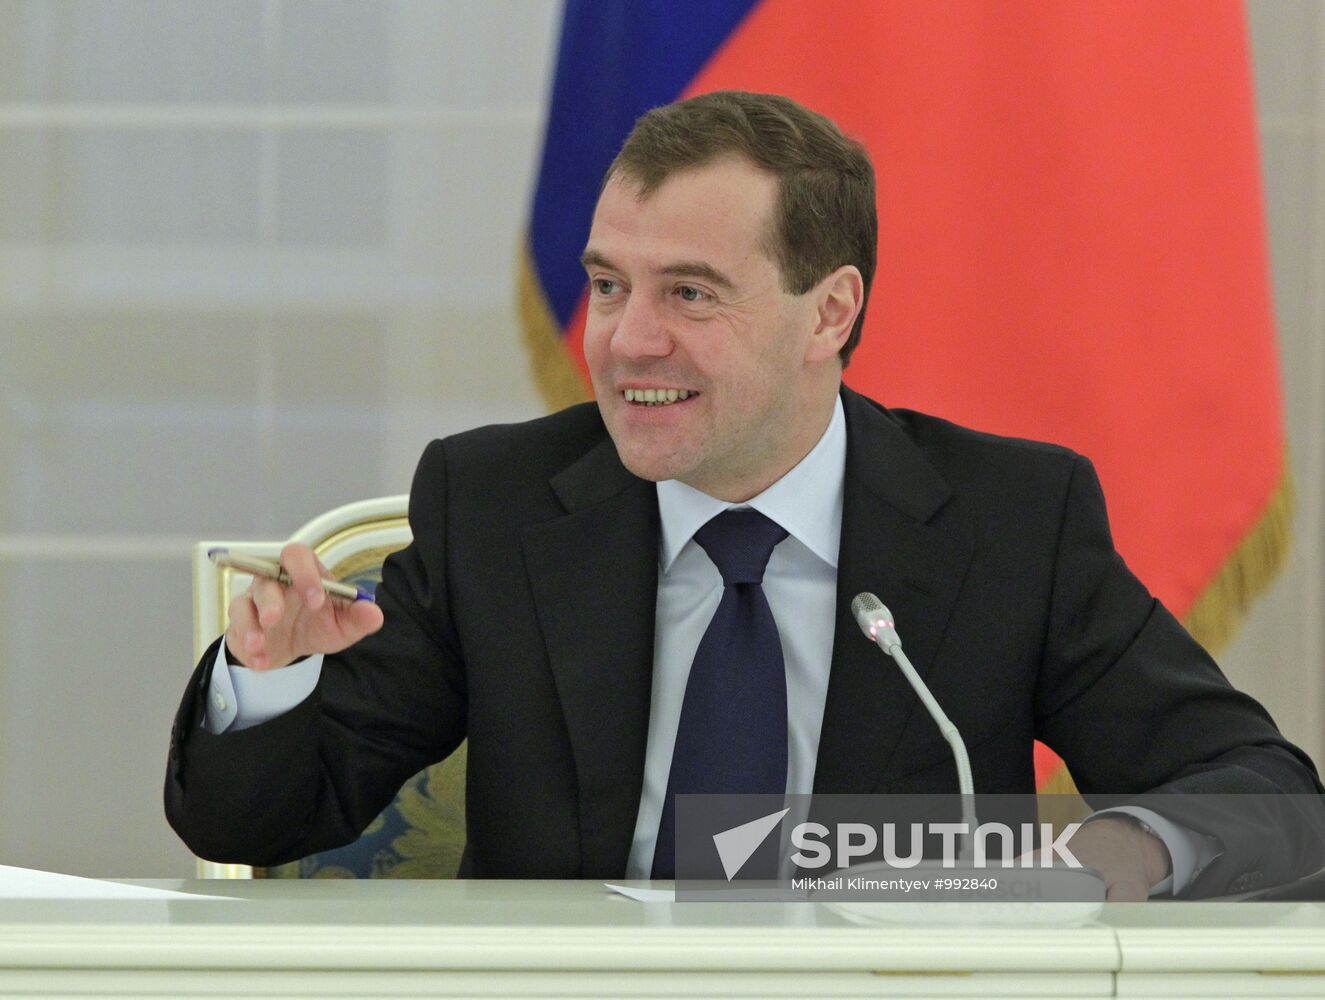 Dmitry Medvedev meets with prosecutors and investigators